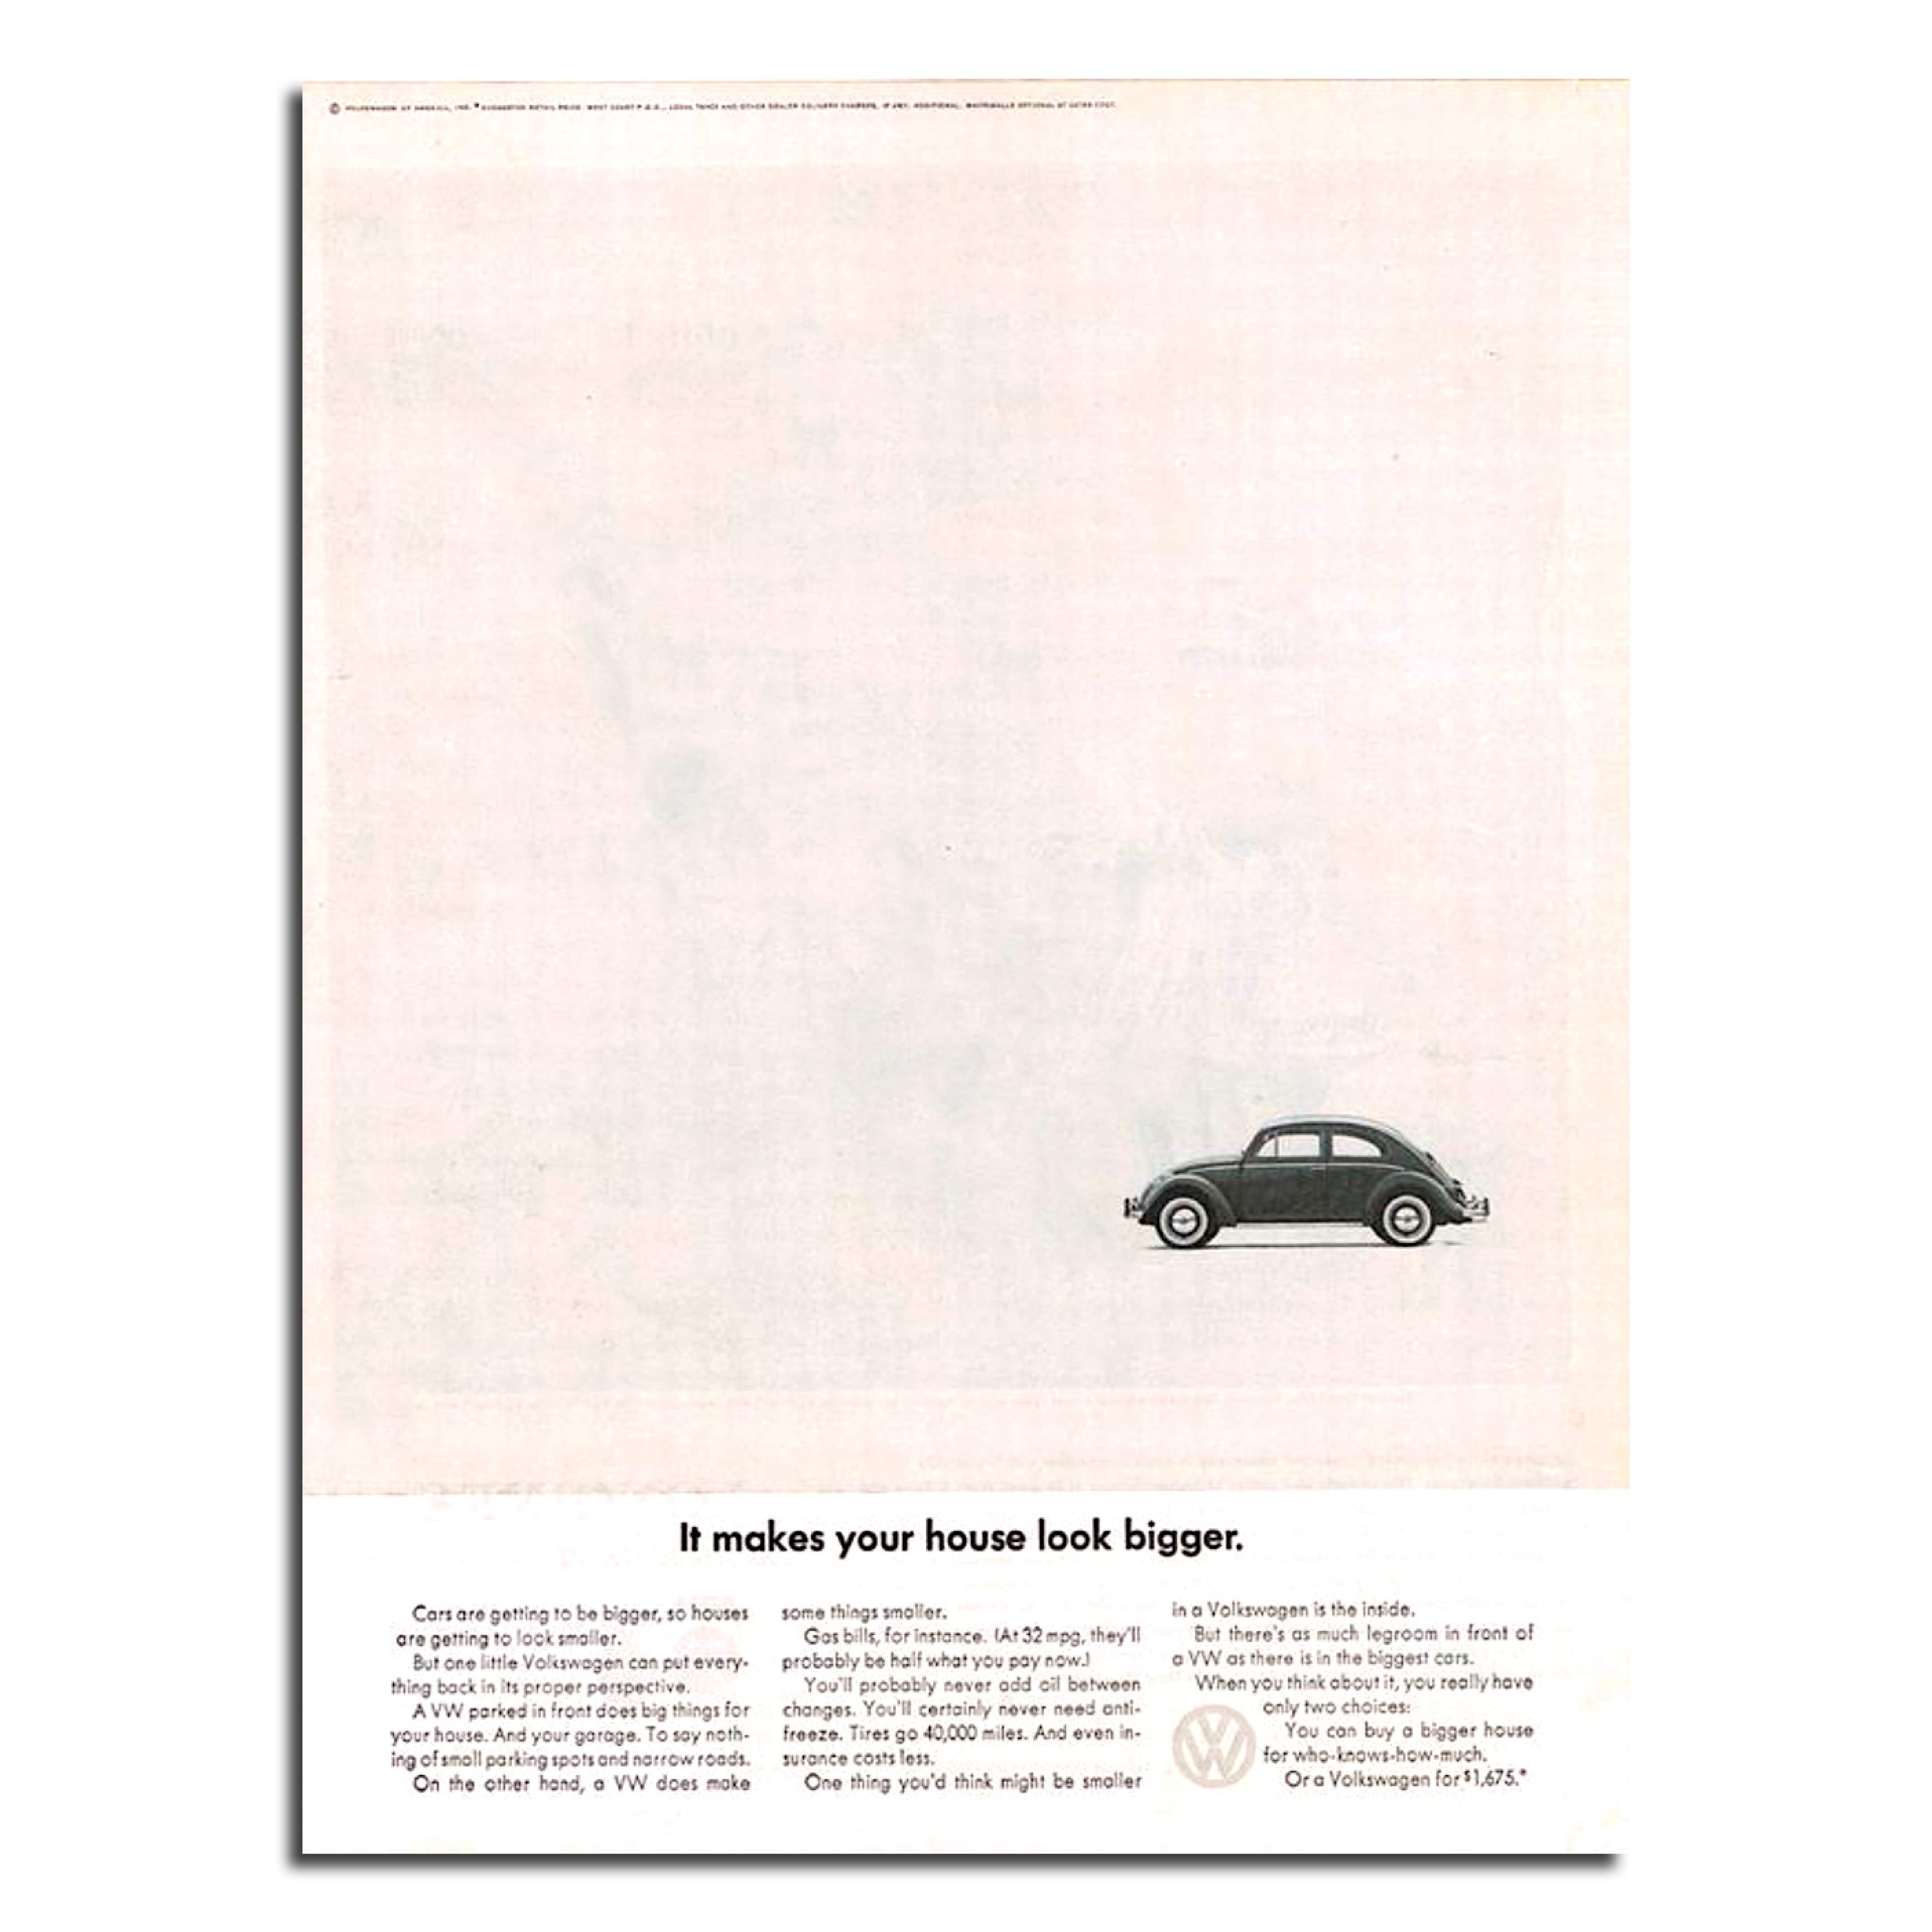 Photo of a small VW Beetle on a white background showing it can make your house look bigger. 1960's VW press ad. 